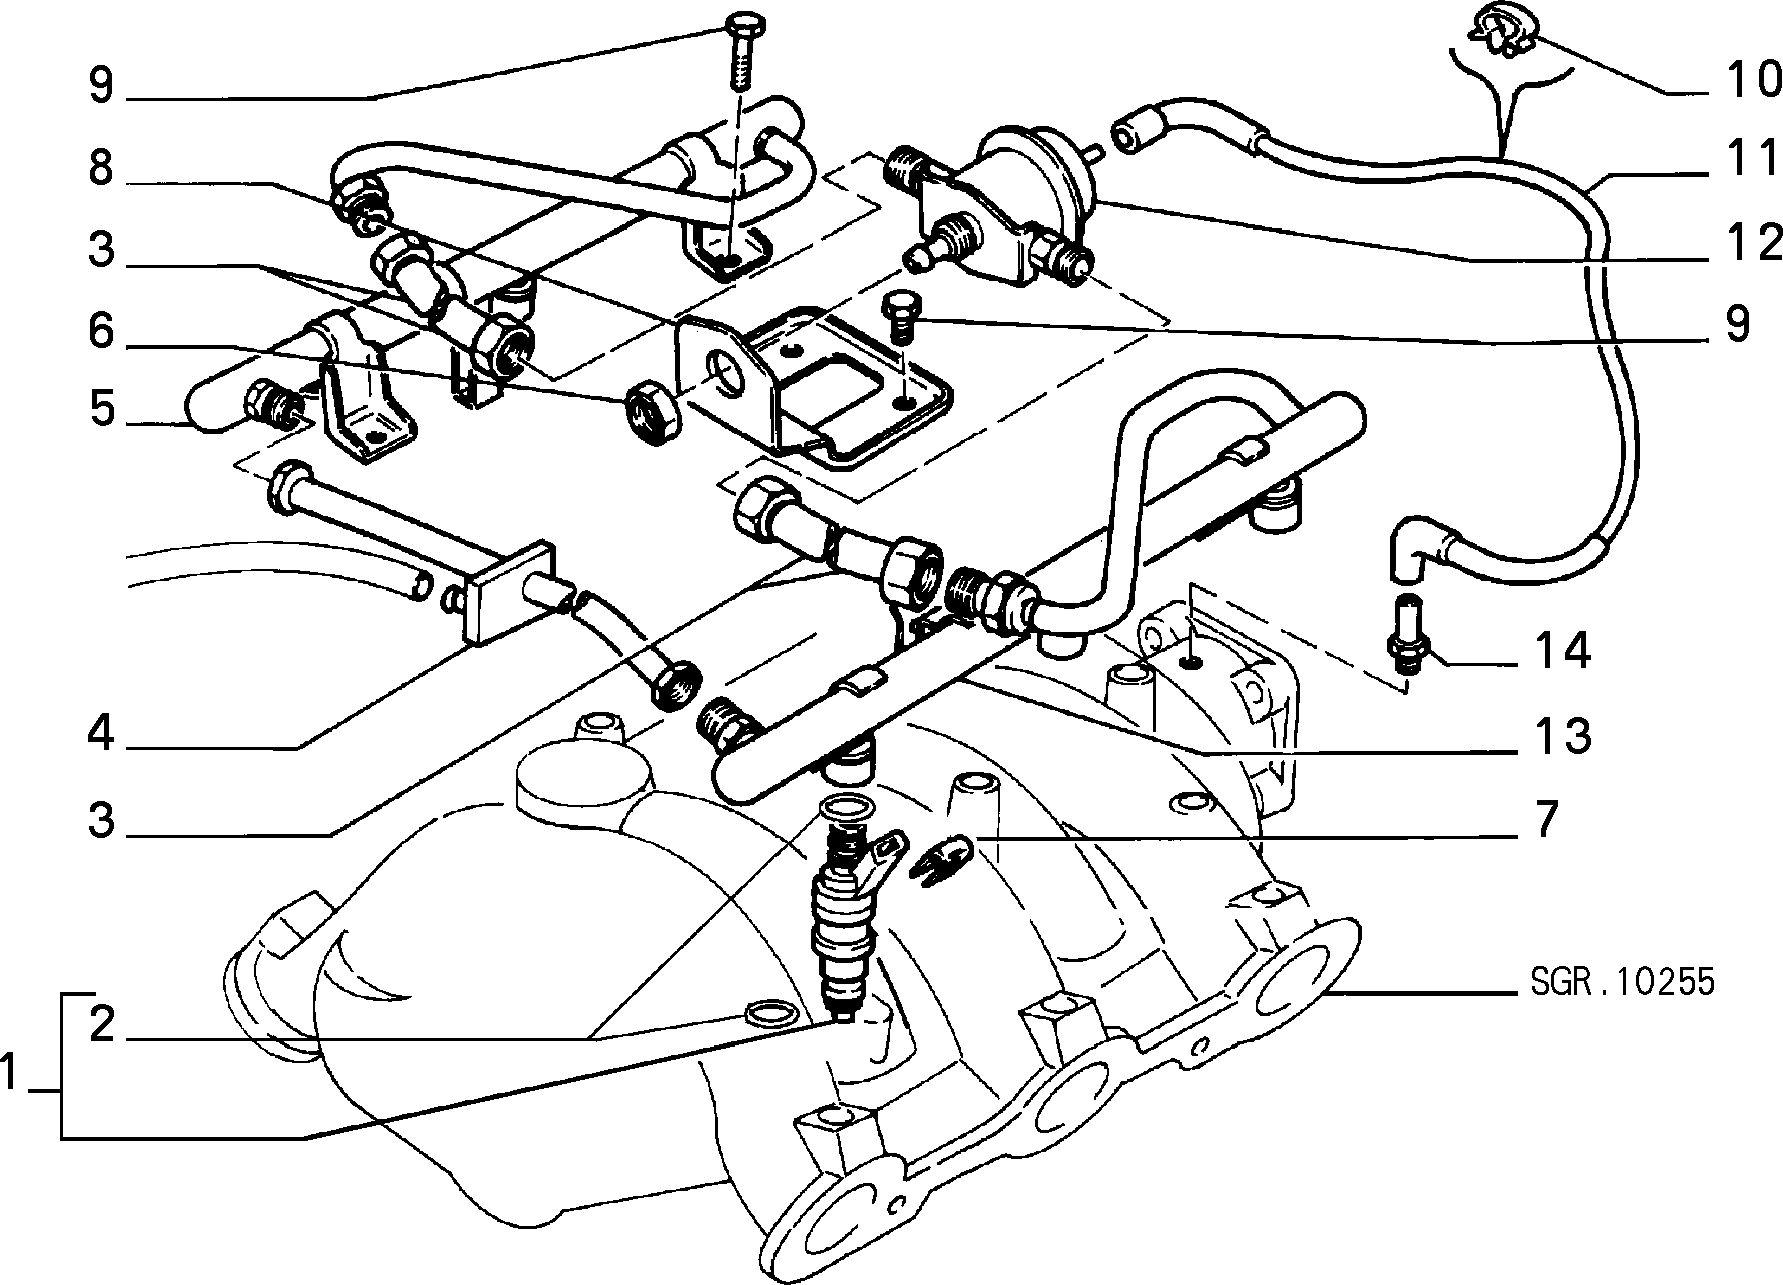 FUEL SUPPLY AND INJECTION для Lancia THEMA THEMA BZ\DS R.88 (1988 - 1992)